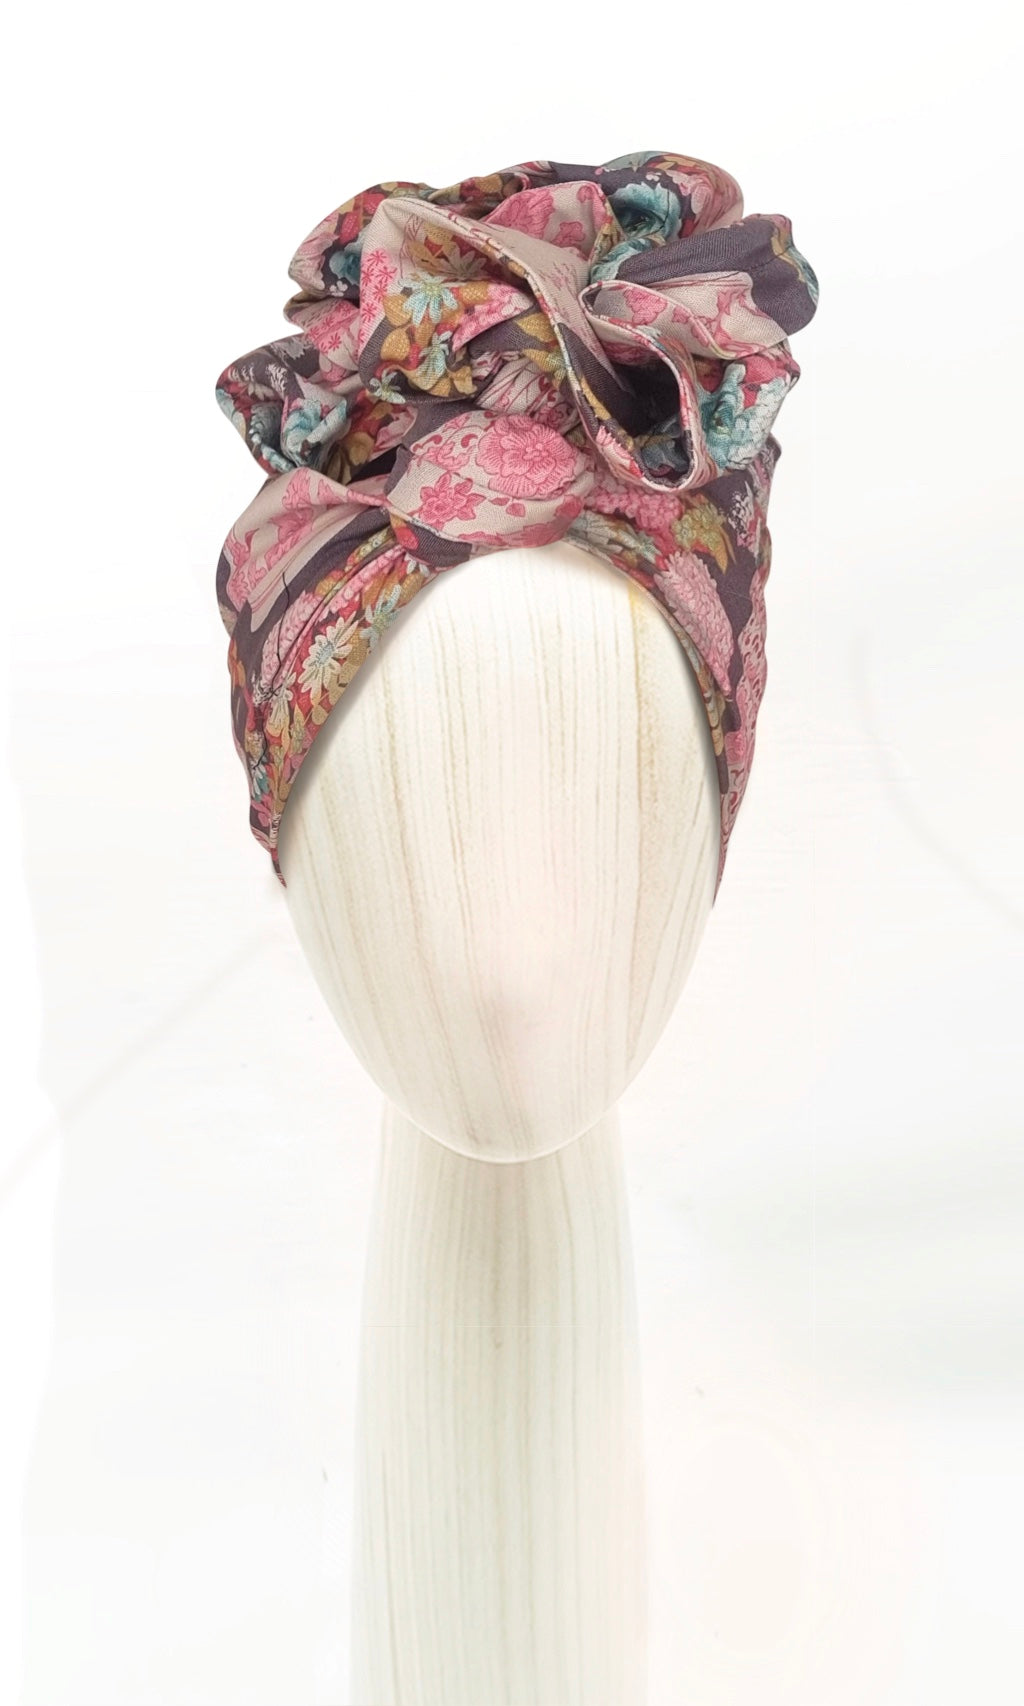 The Celine Martine wired head wrap in Flowervae grey displayed on a mannequin head styled in one of several hair scarf options